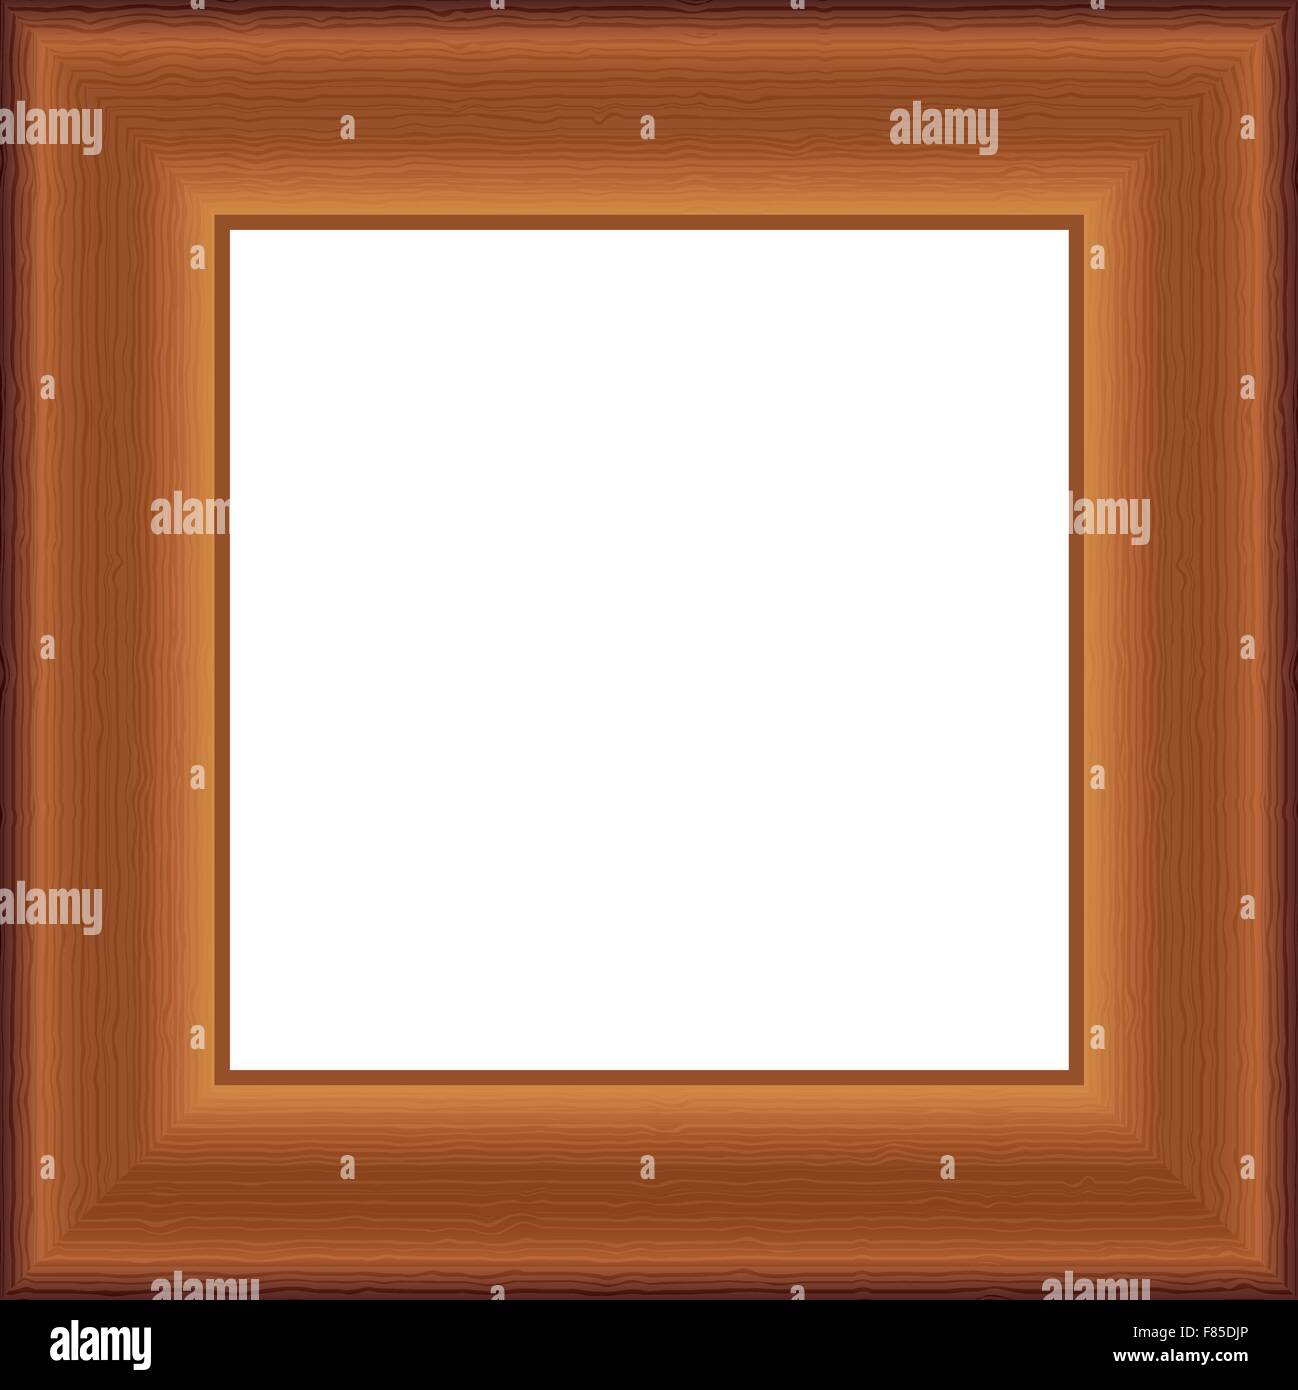 Wood frame isolated on white background. Vector illustration. Stock Vector